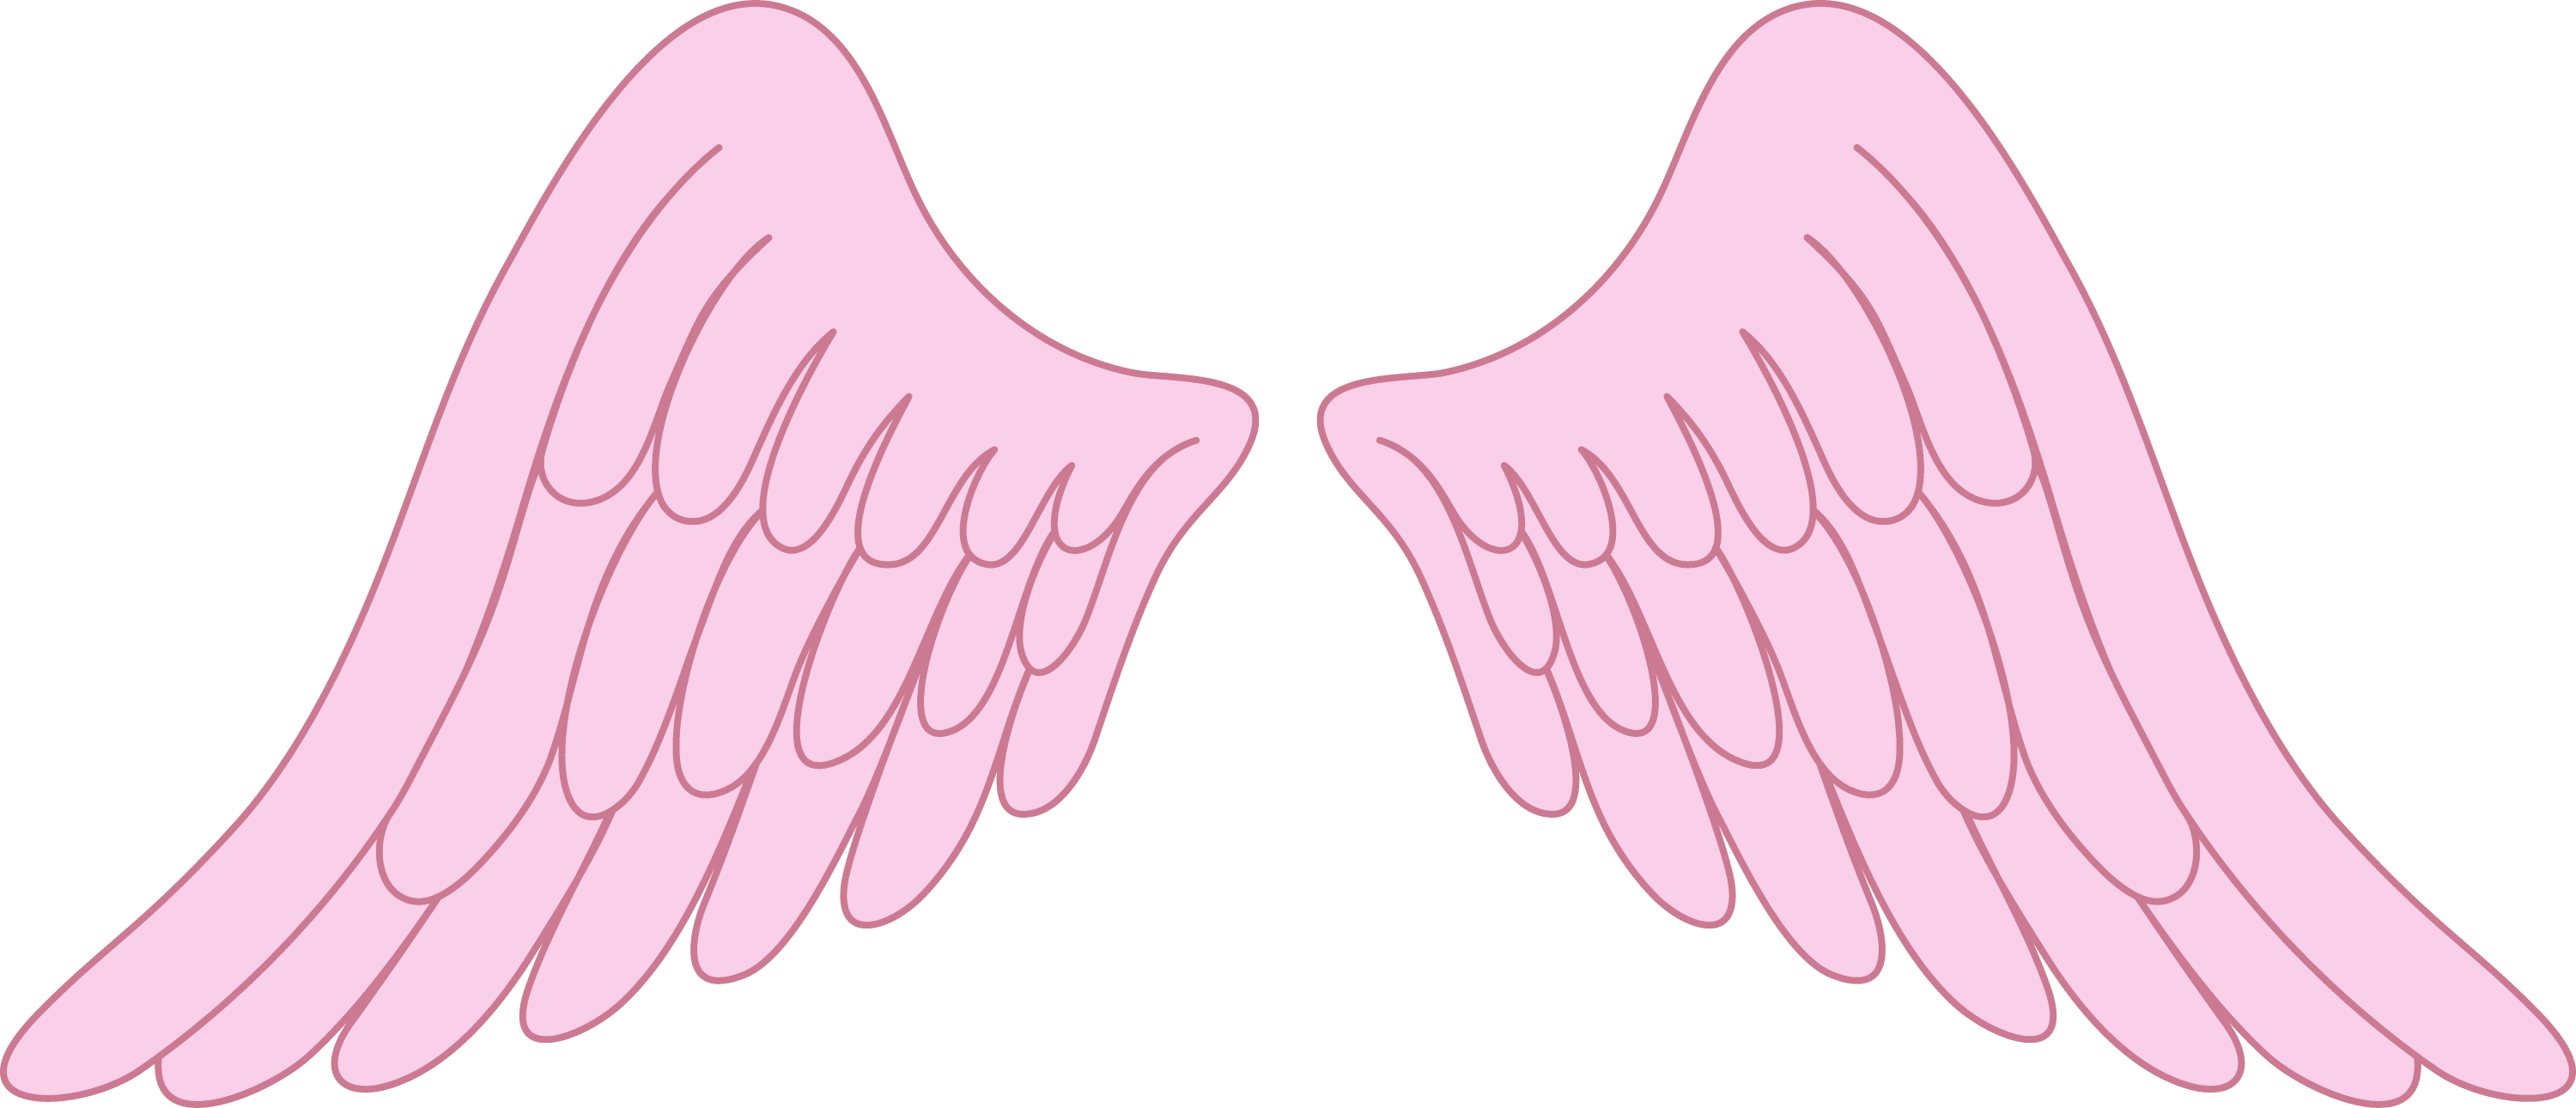 clip art images wings - photo #36